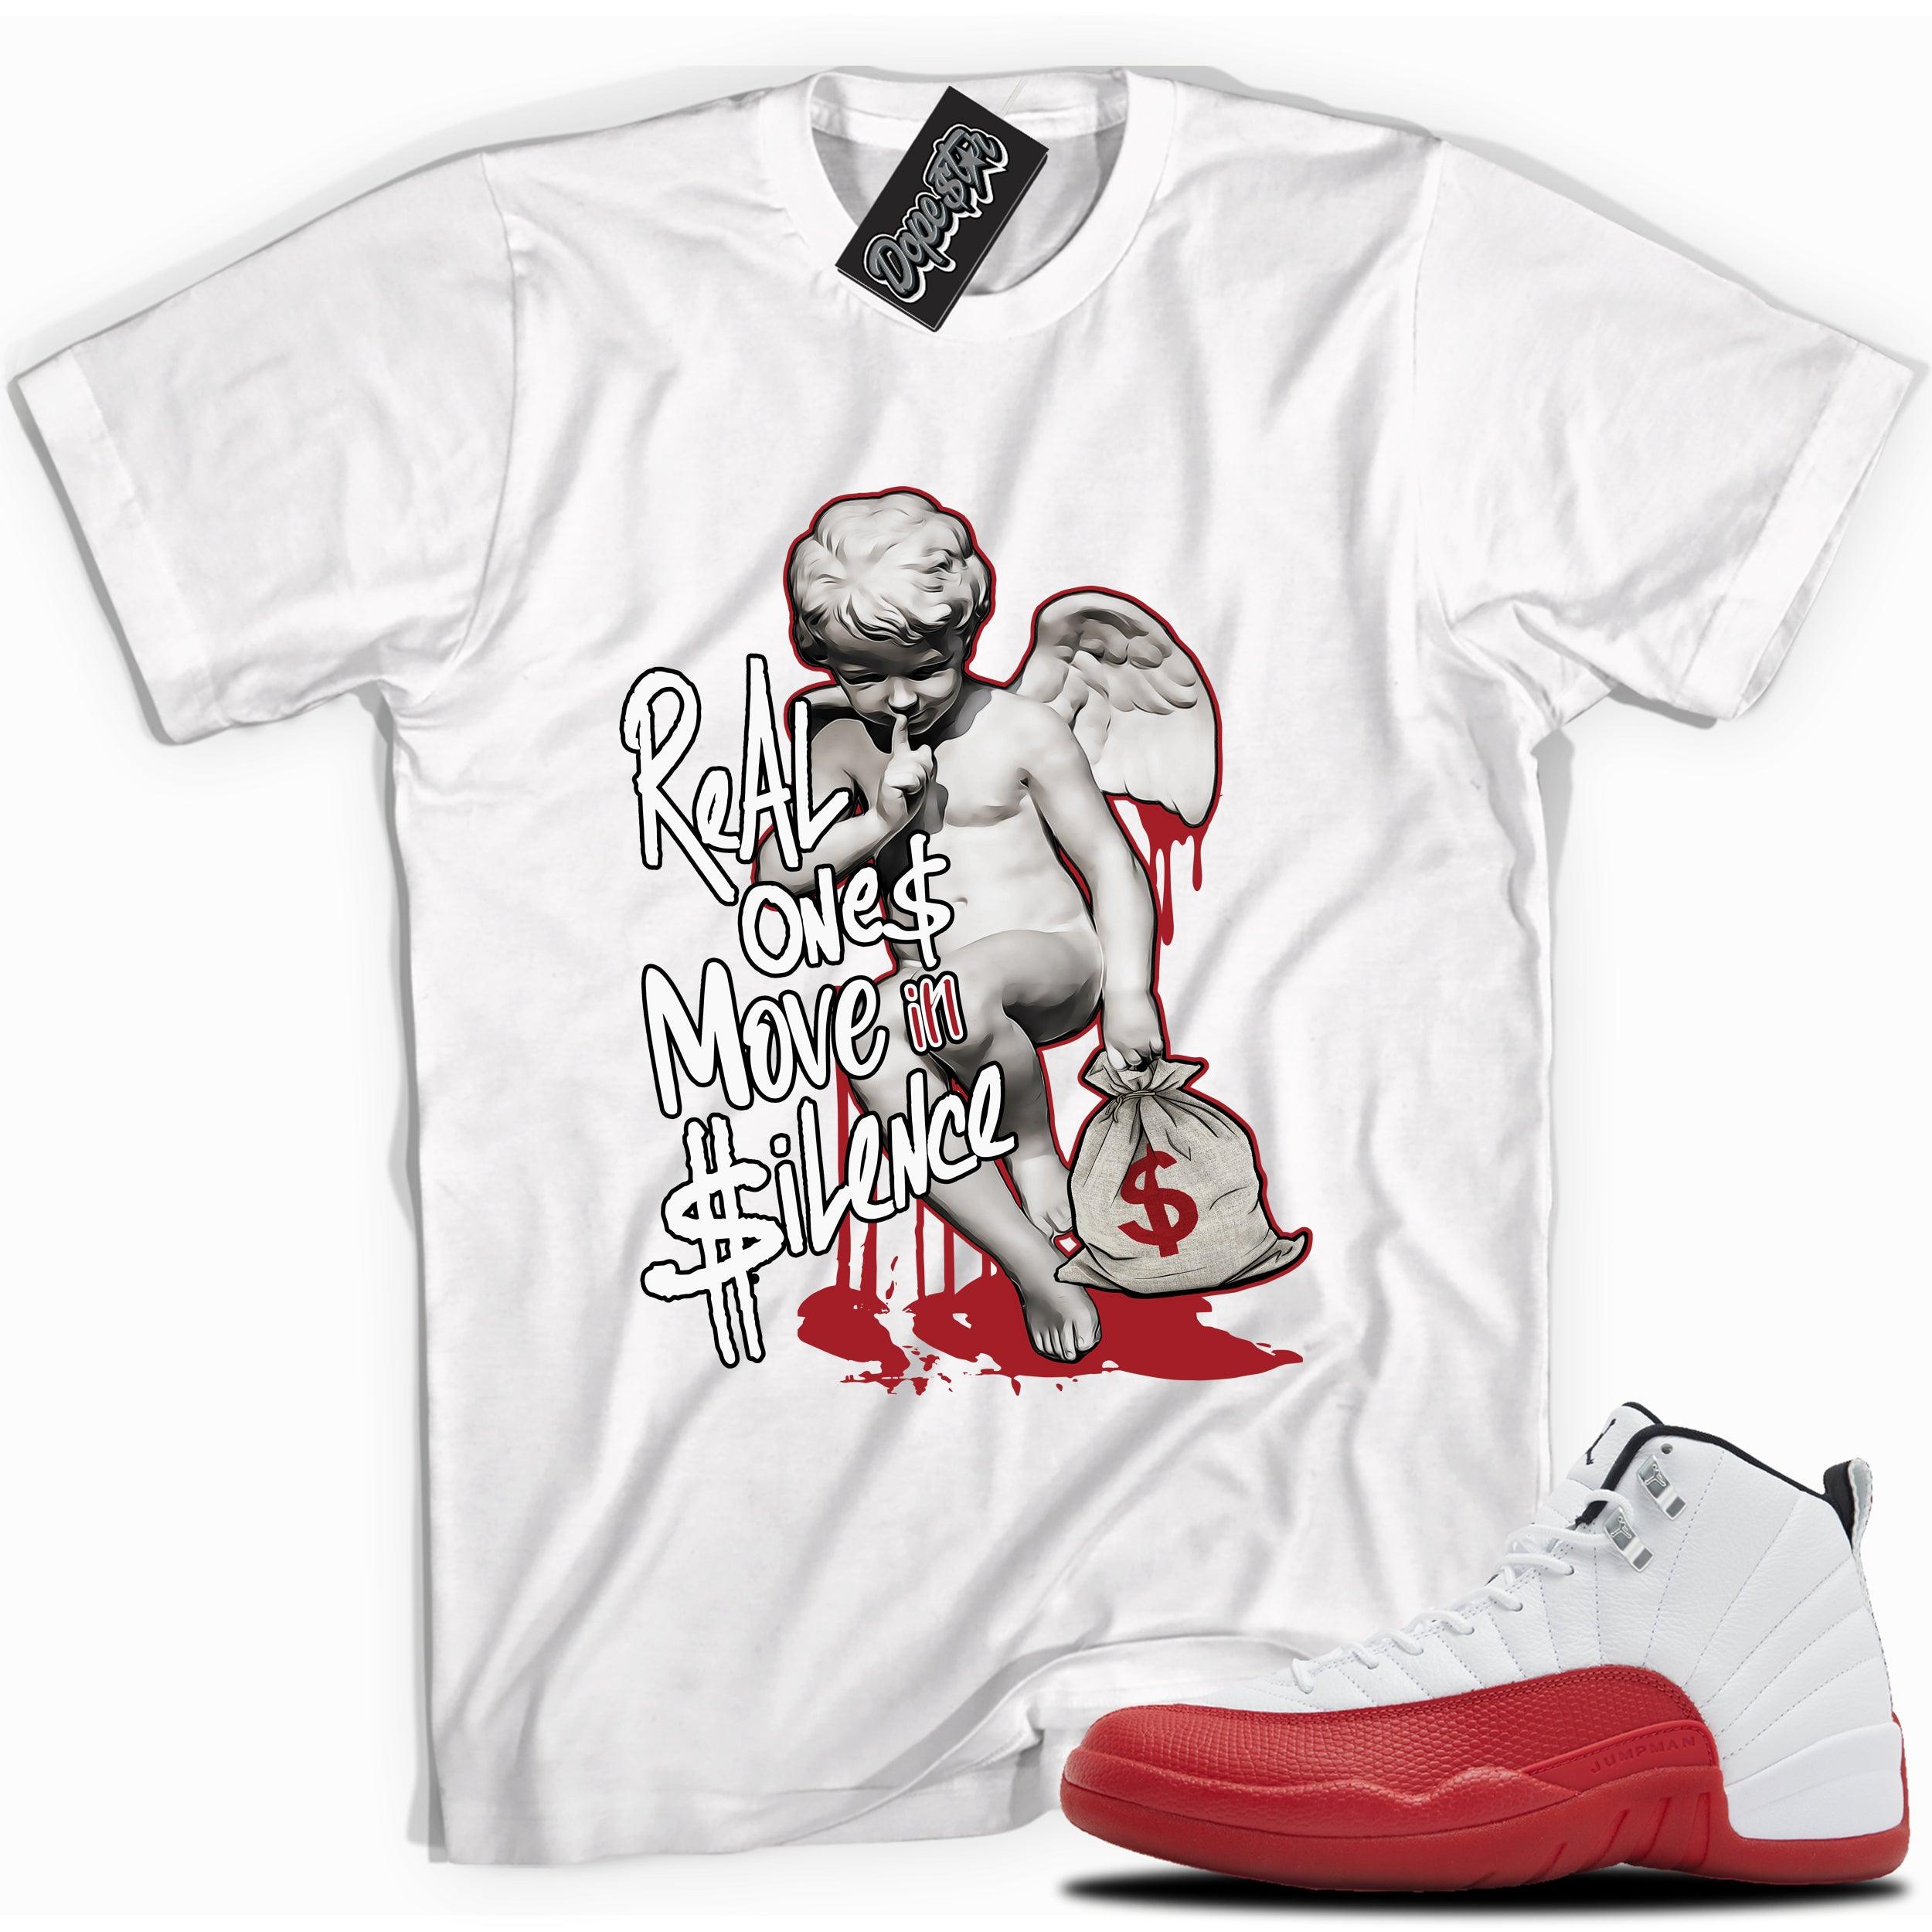 Cool White graphic tee with “REAL ONES CHERUB” print, that perfectly matches Air Jordan 12 Retro Cherry Red 2023 red and white sneakers